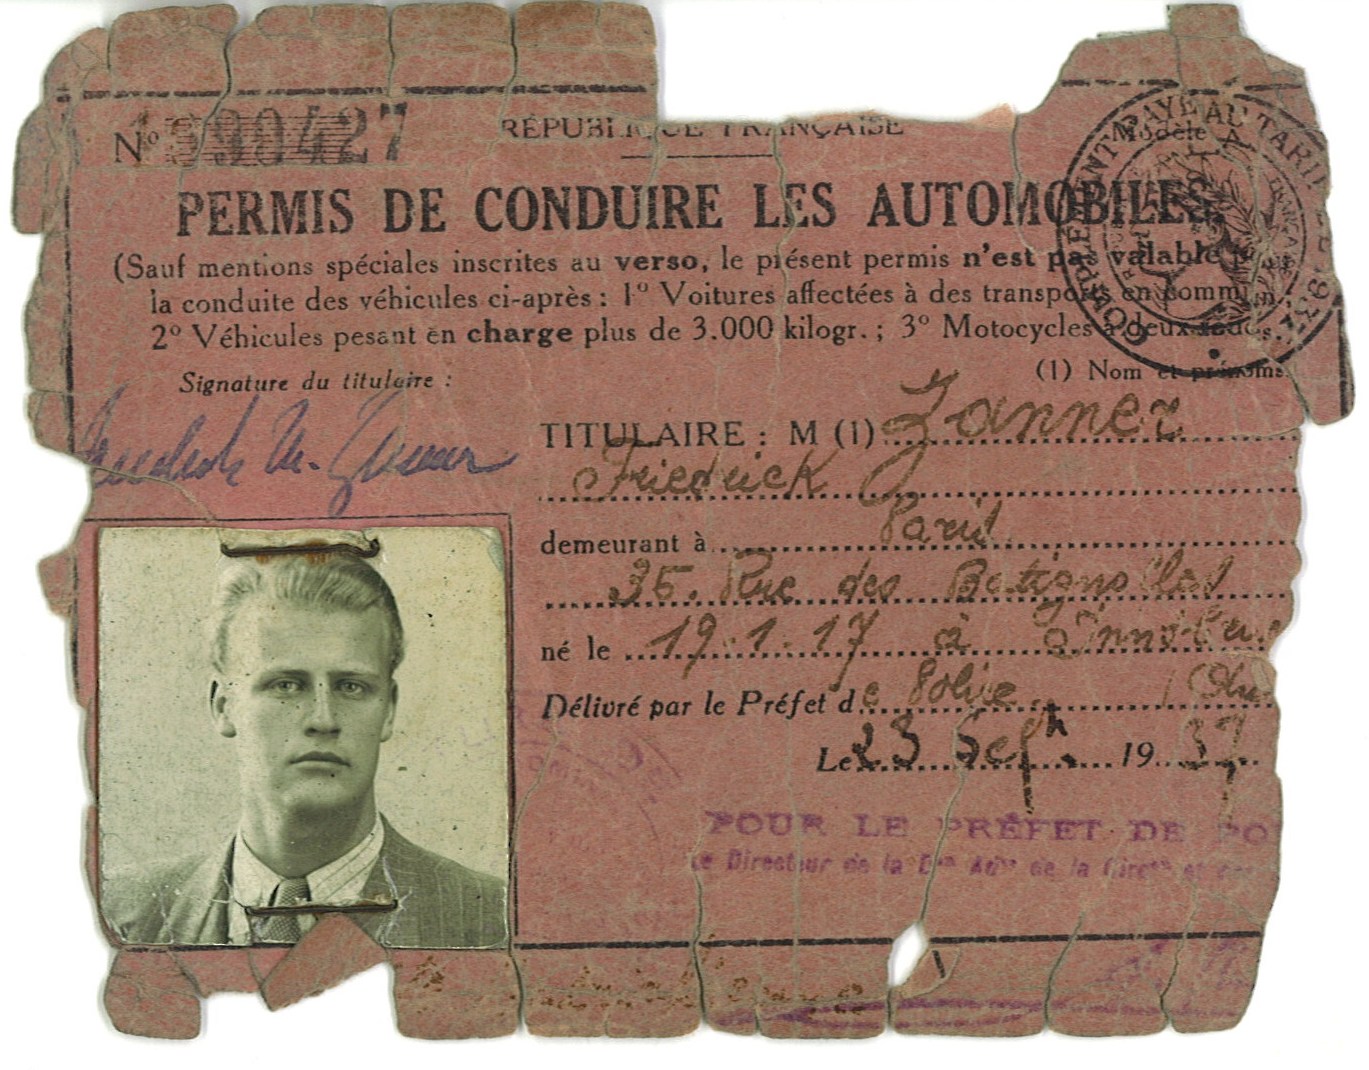 Copy of Friedrich Zanner's driver's license, given to the Operetta Research Center by Mr. Zanner's widow. 